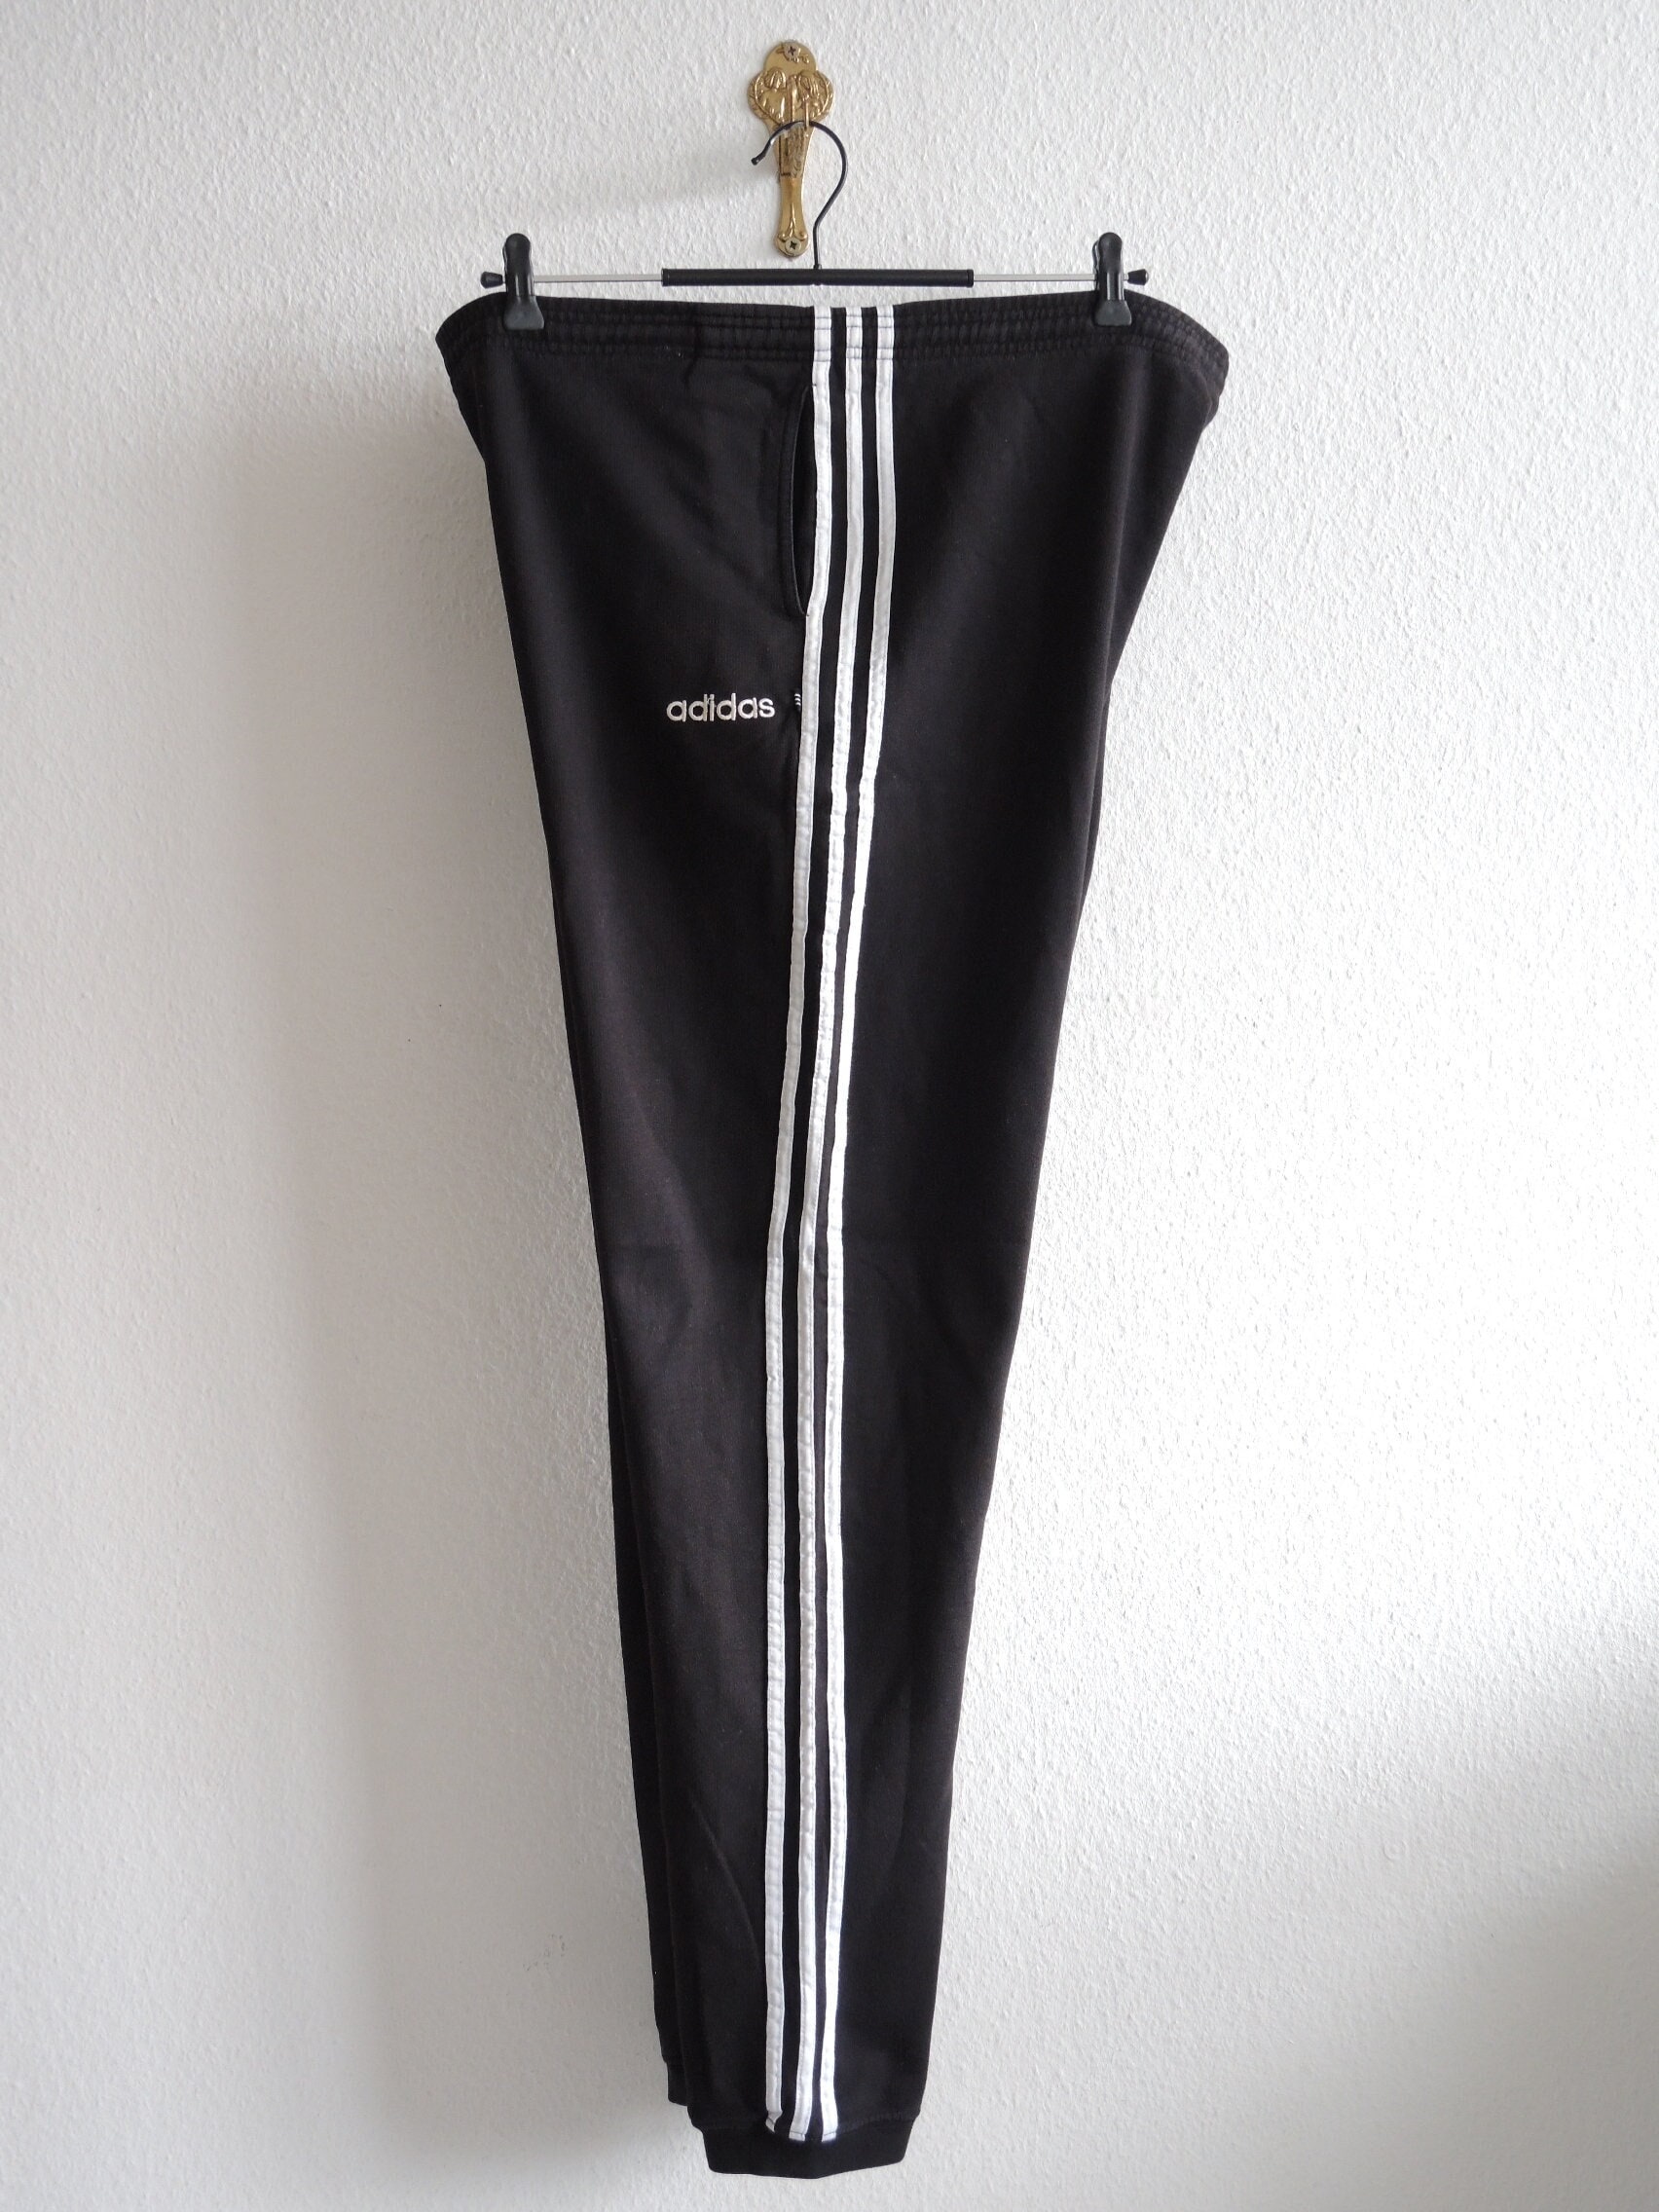 Adidas Track Pants 90s Gym Jogging Running Blue Striped Track Suit Warm Up  Athletic Sports Vintage Retro Baggy Warmup Small